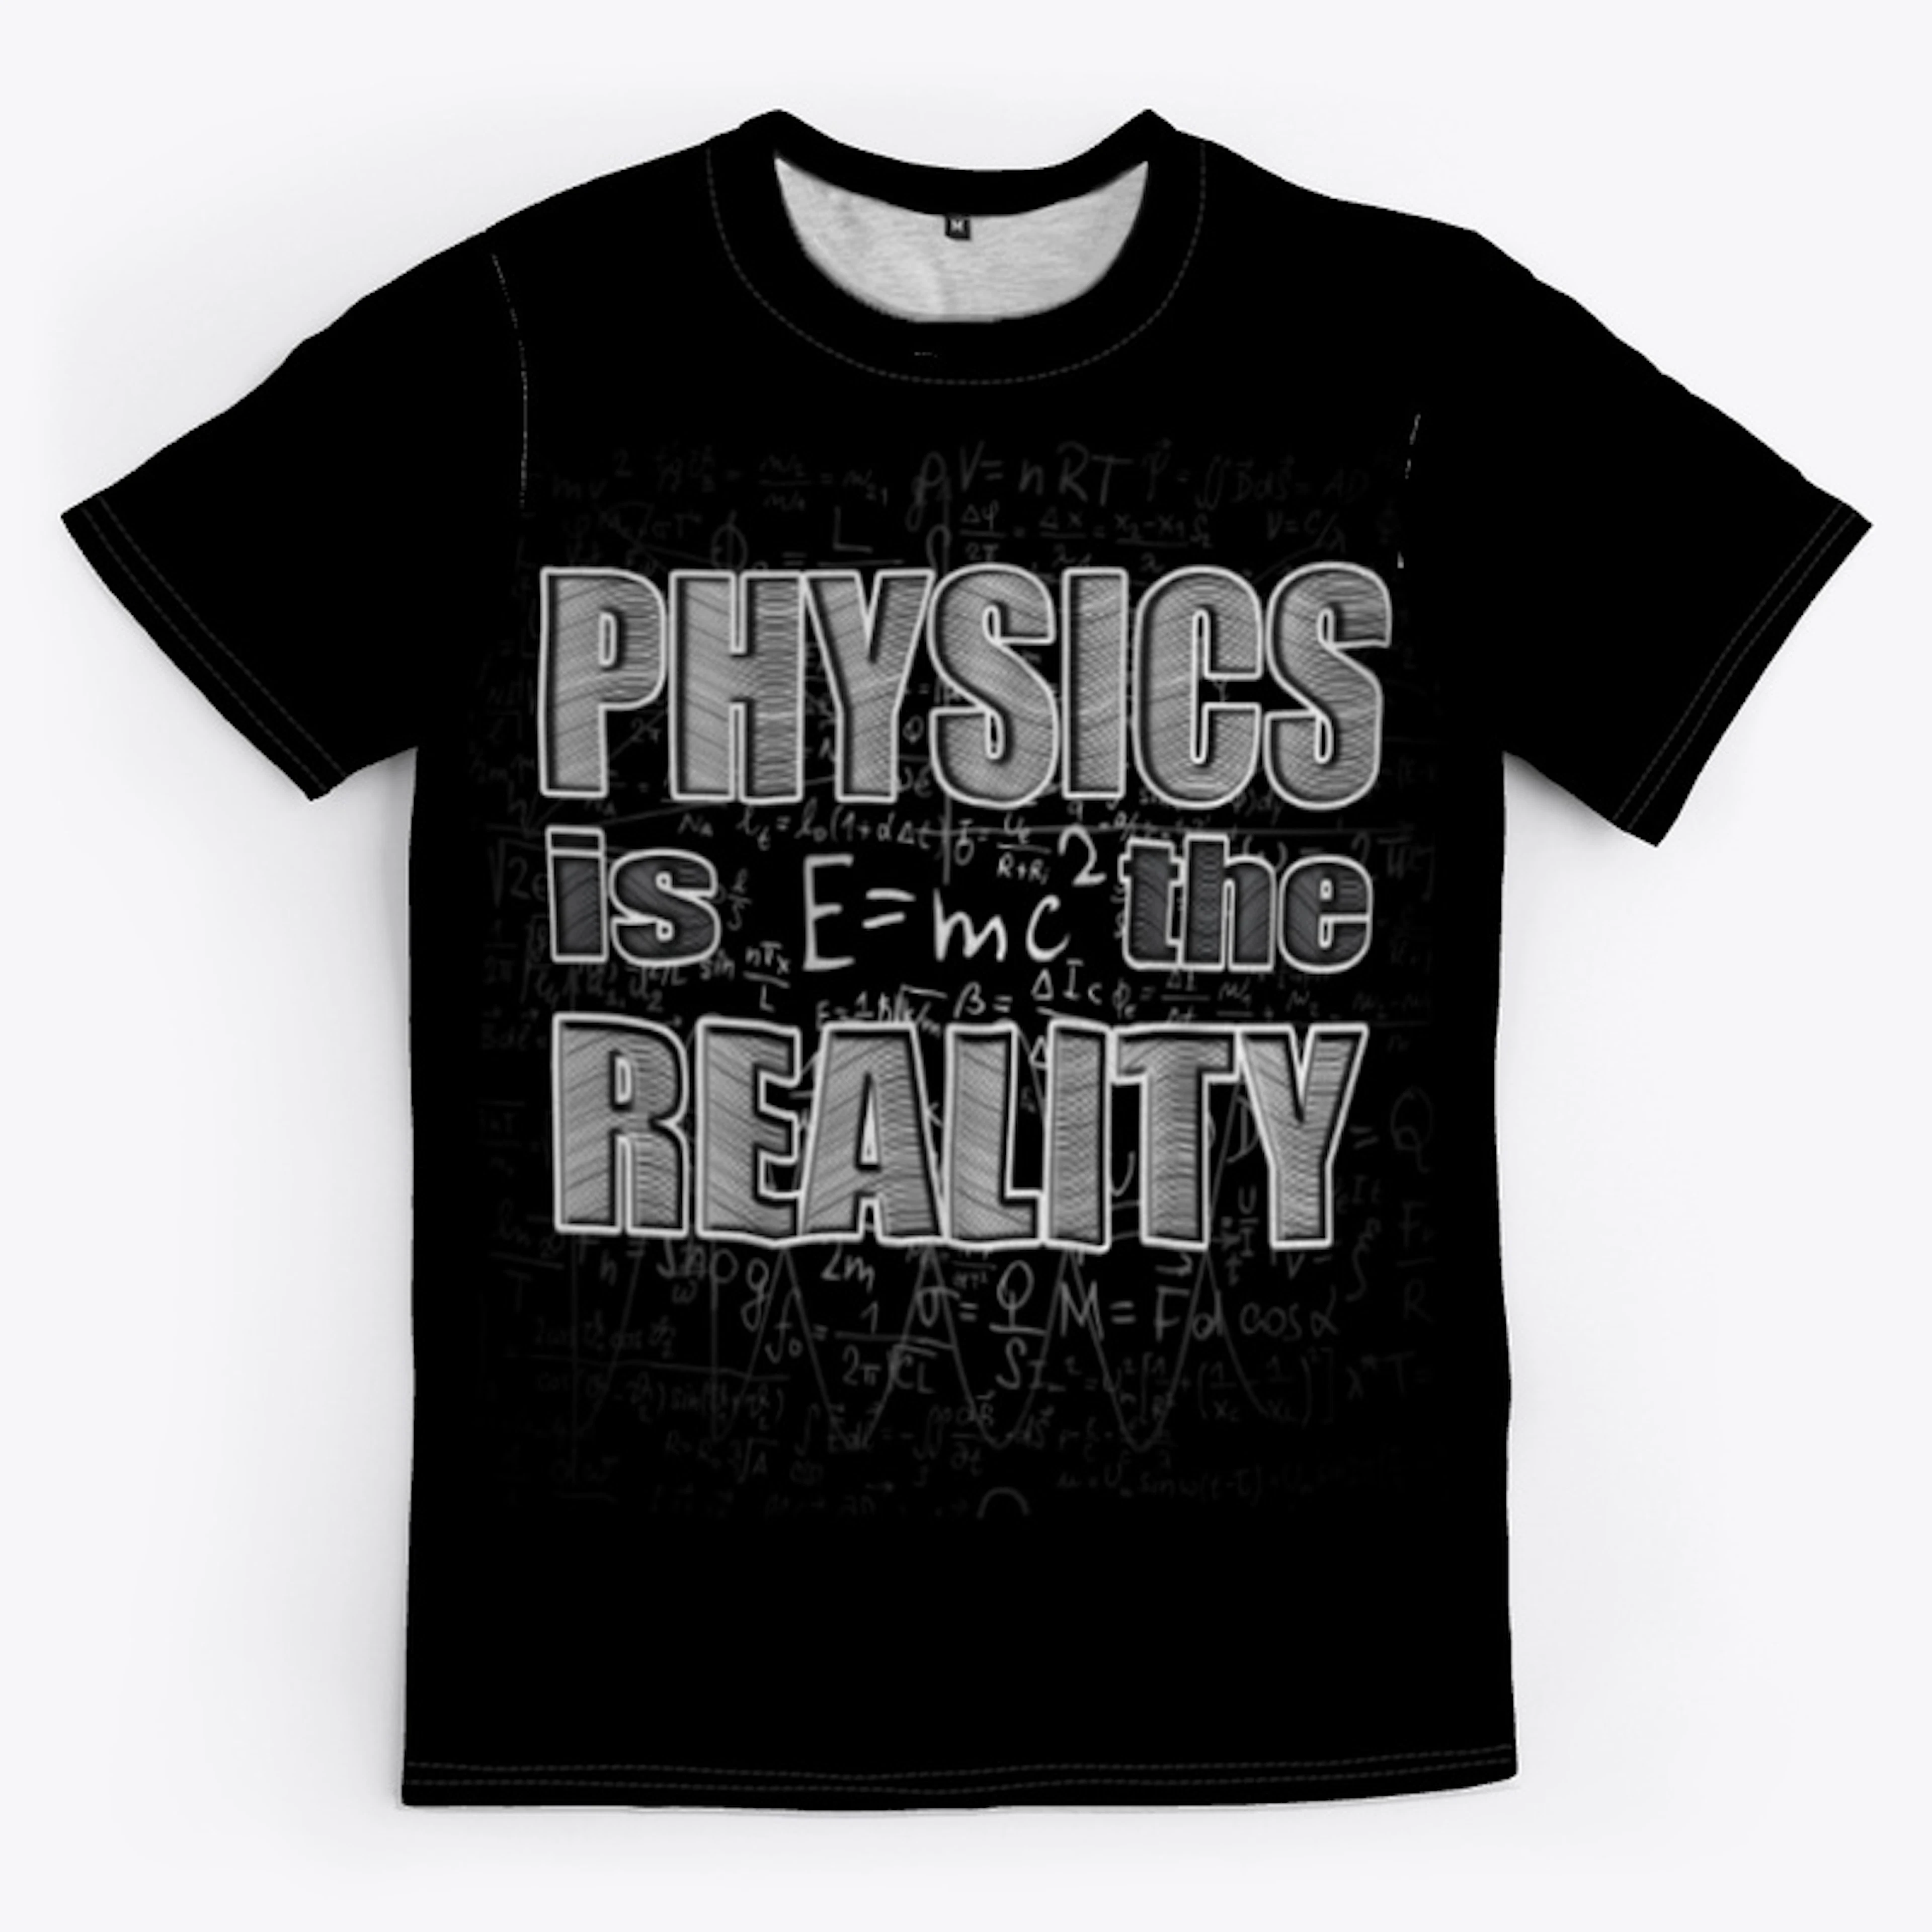 "PHYSICS" is the Reality